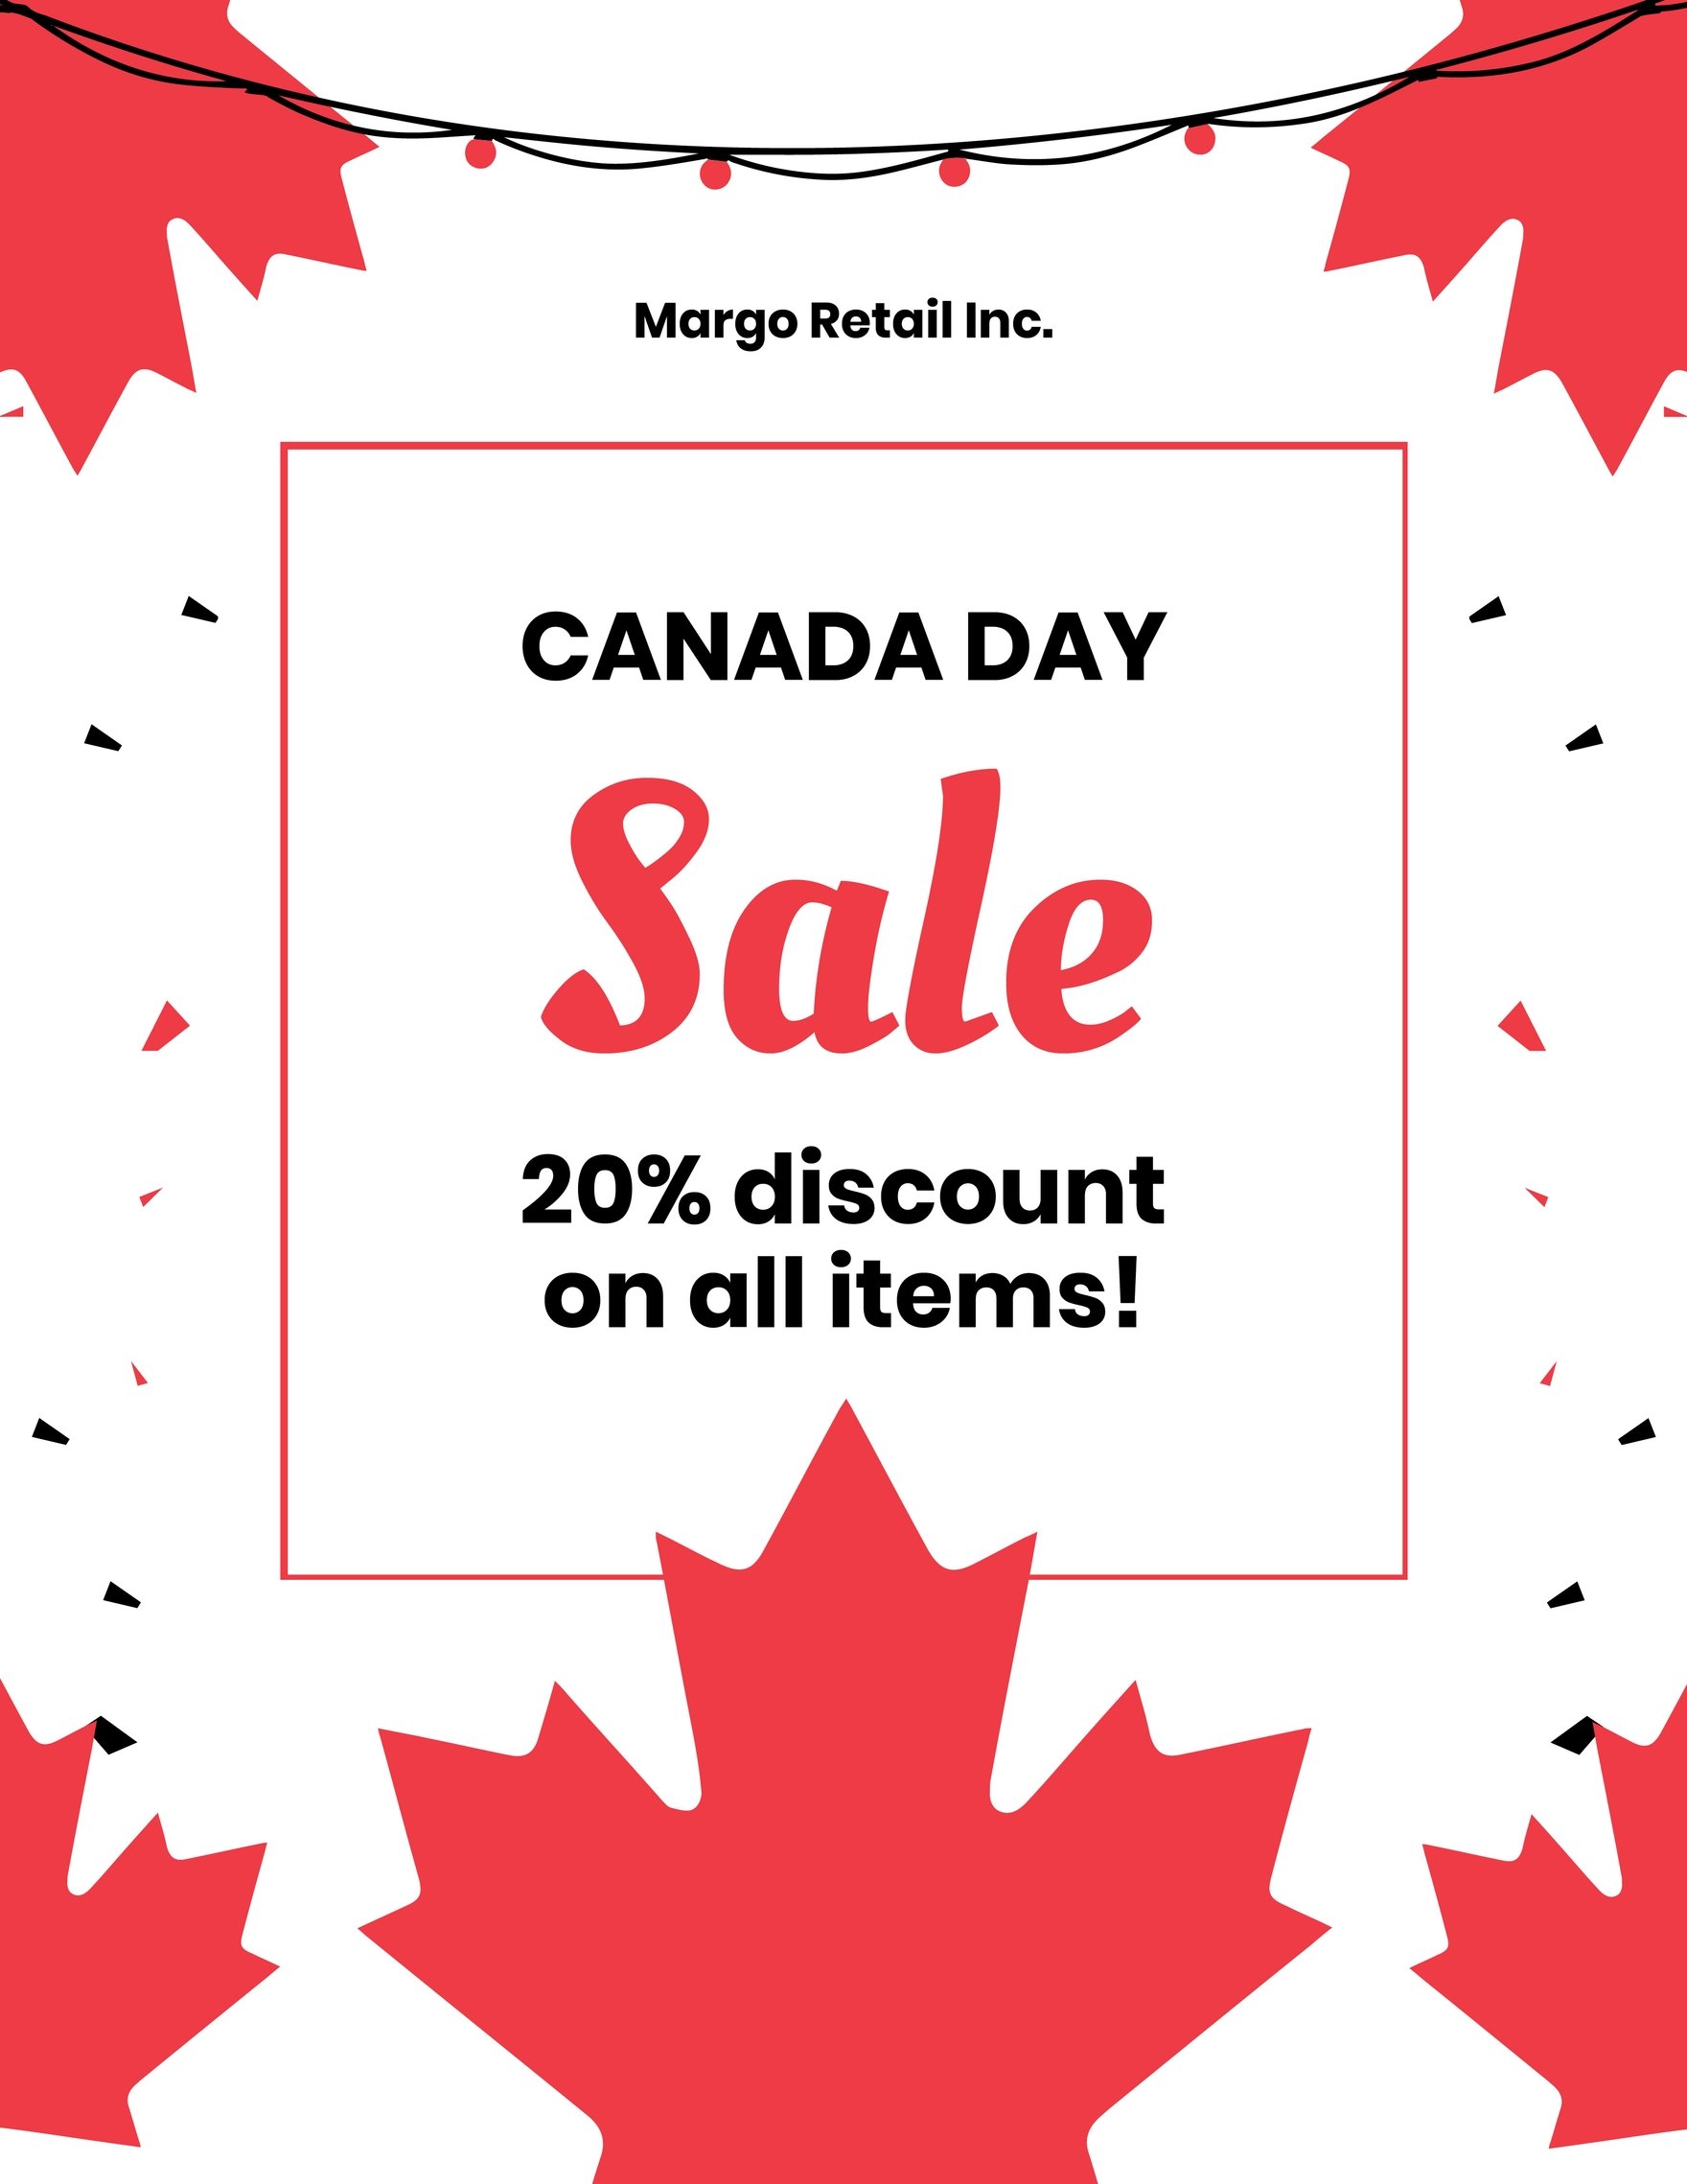 Canada Day Retail Sale Flyer Template